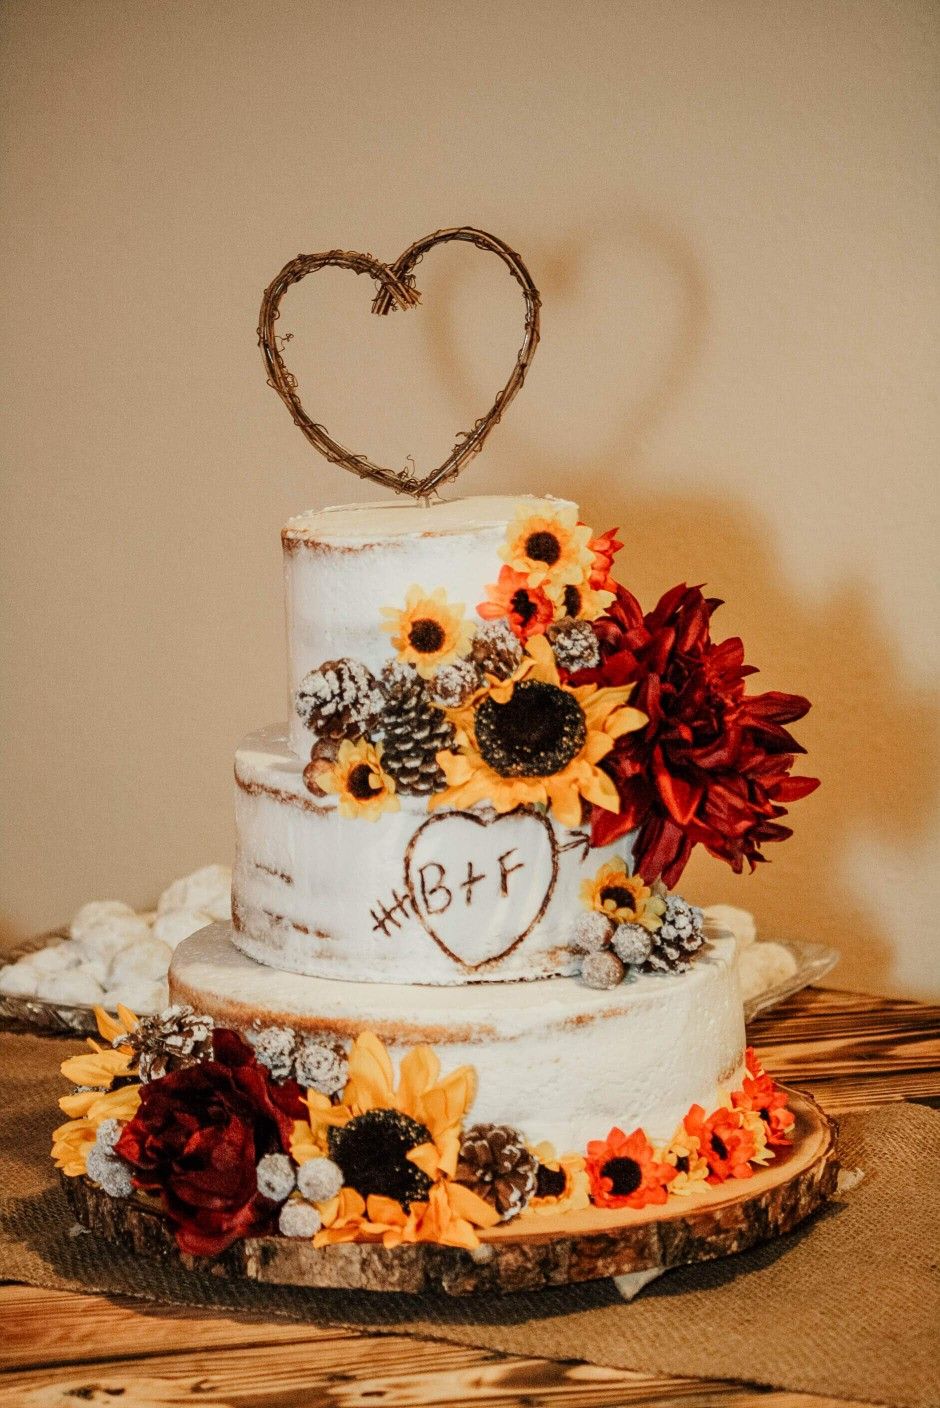 Rustic red and yellow 3 tier birch semi-naked wedding cake with sunflowers